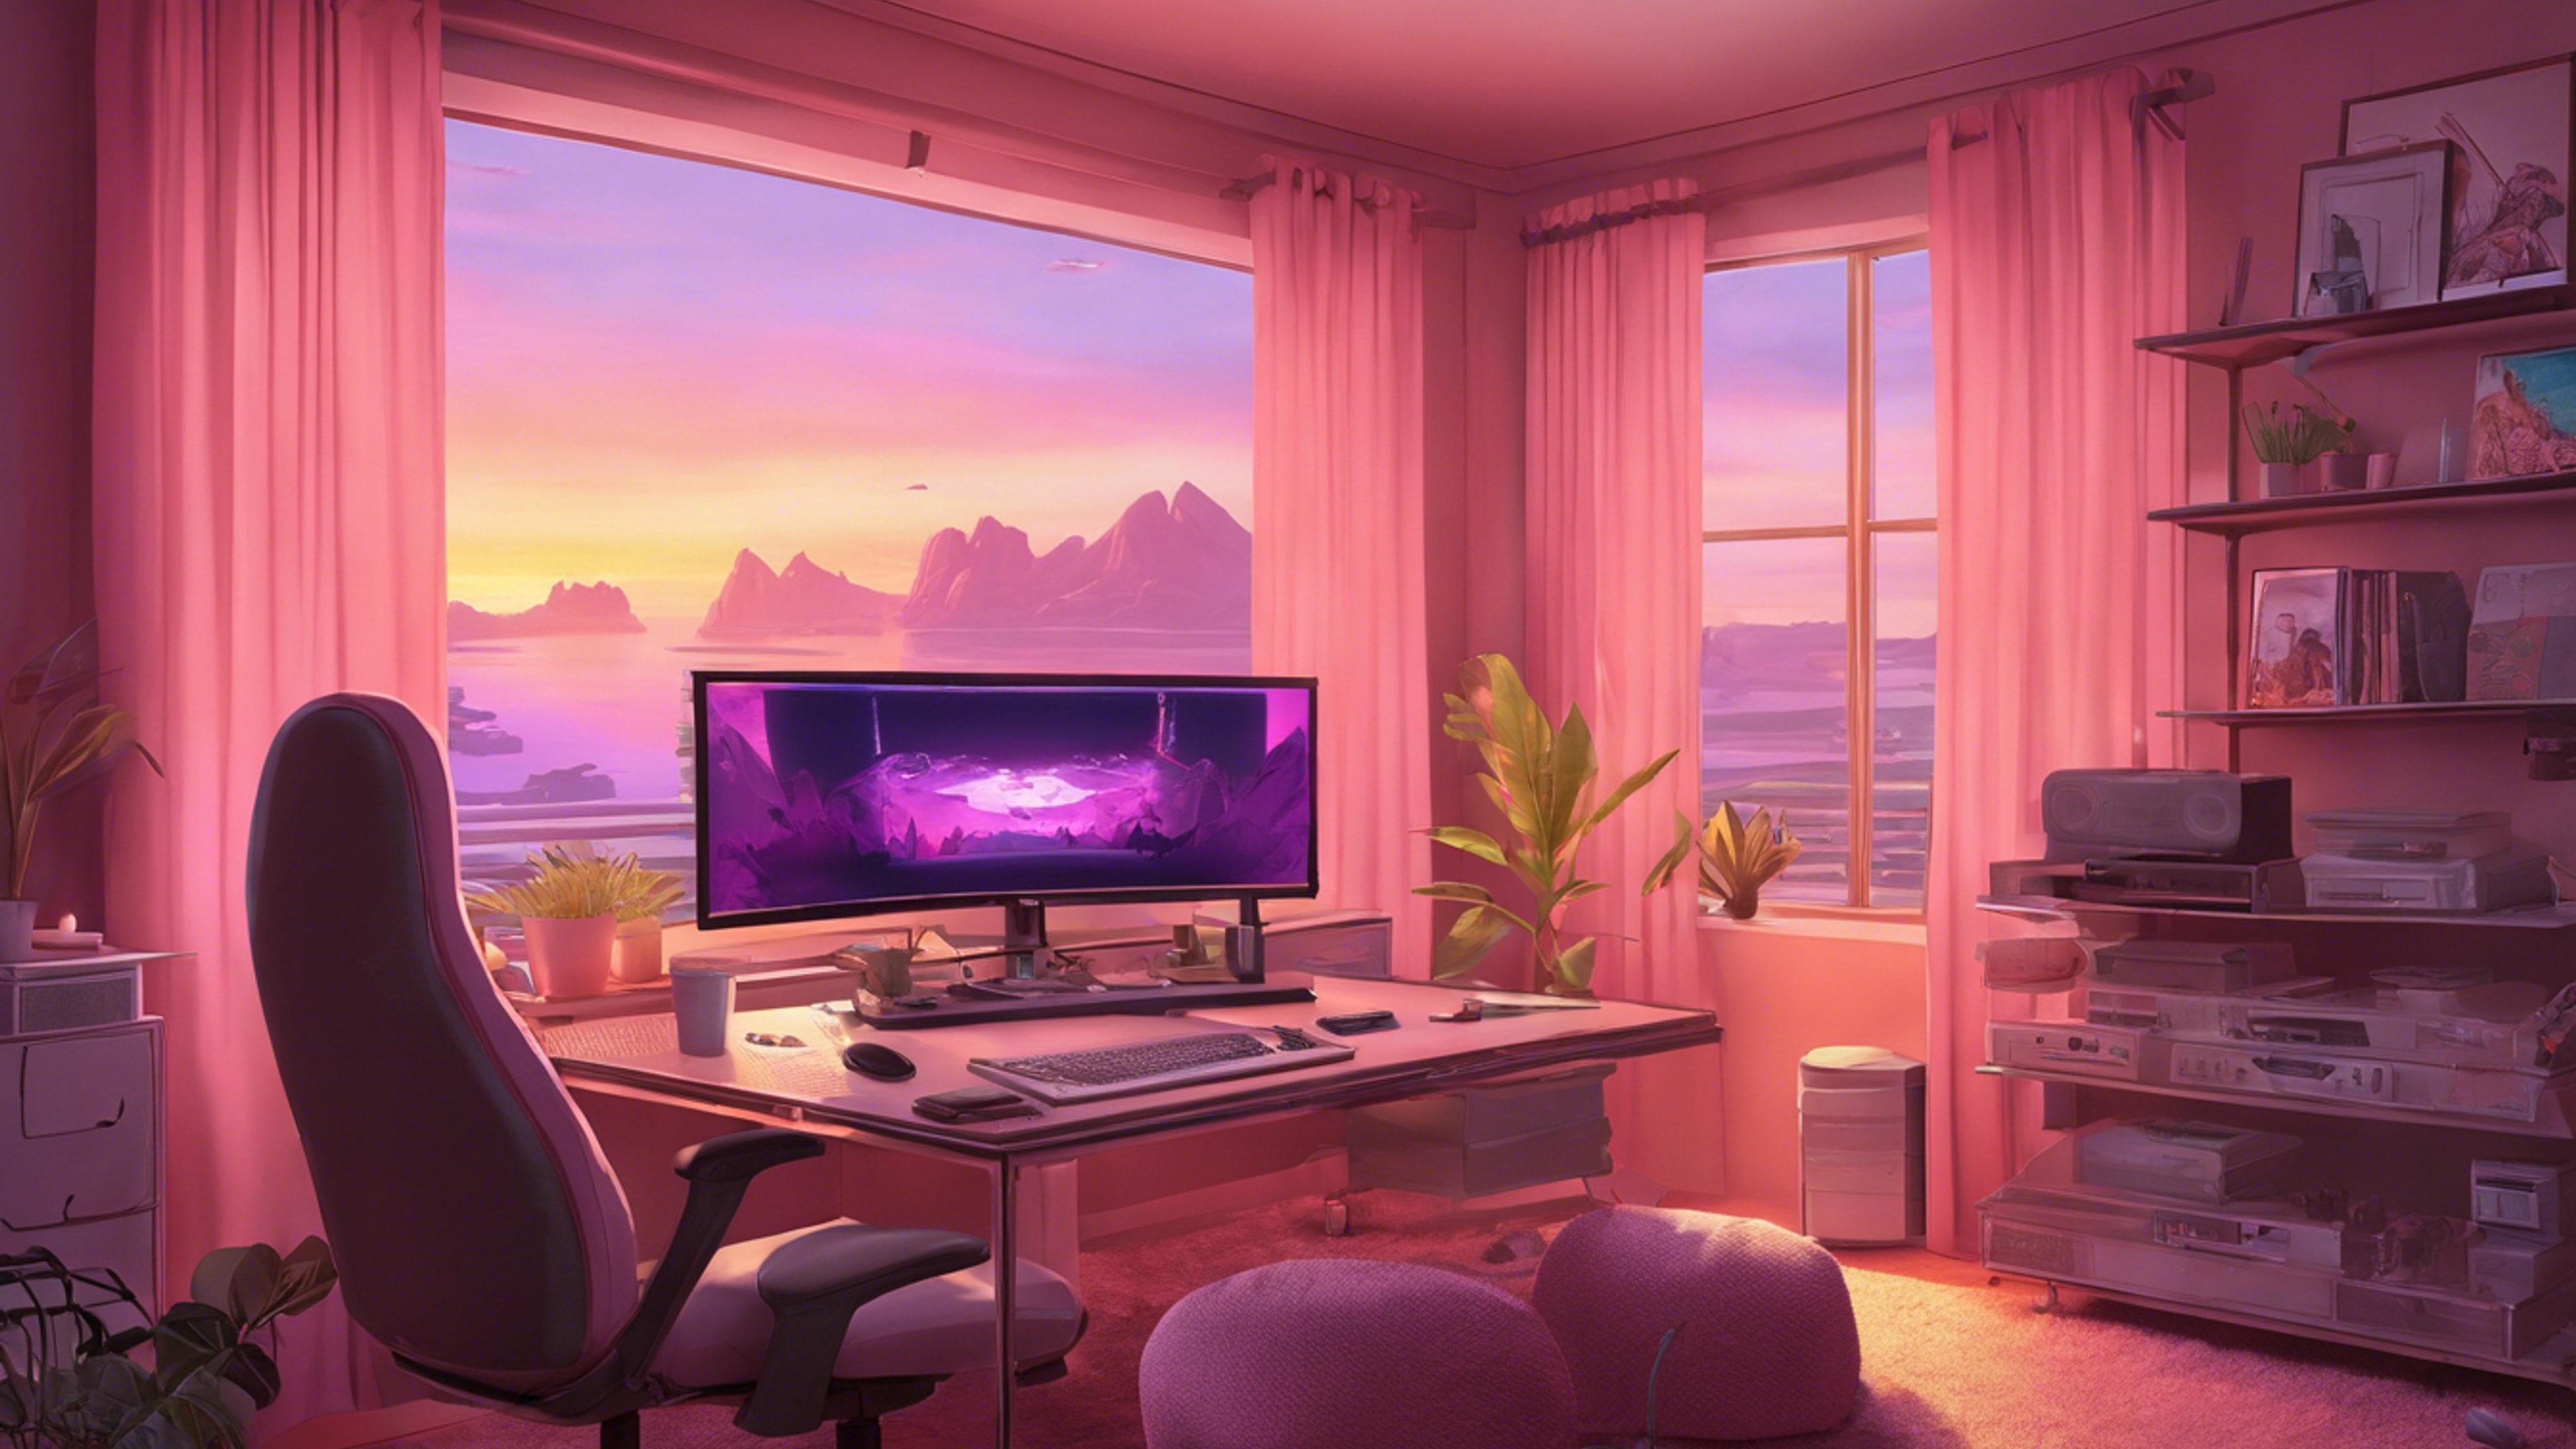 A beautiful shot of a gaming room at dusk with pastel pink curtains slightly drawn, allowing soft sunset hues to blend with the gaming setup's ambient light. Tapetai[98f2c4ff56214265aa5c]